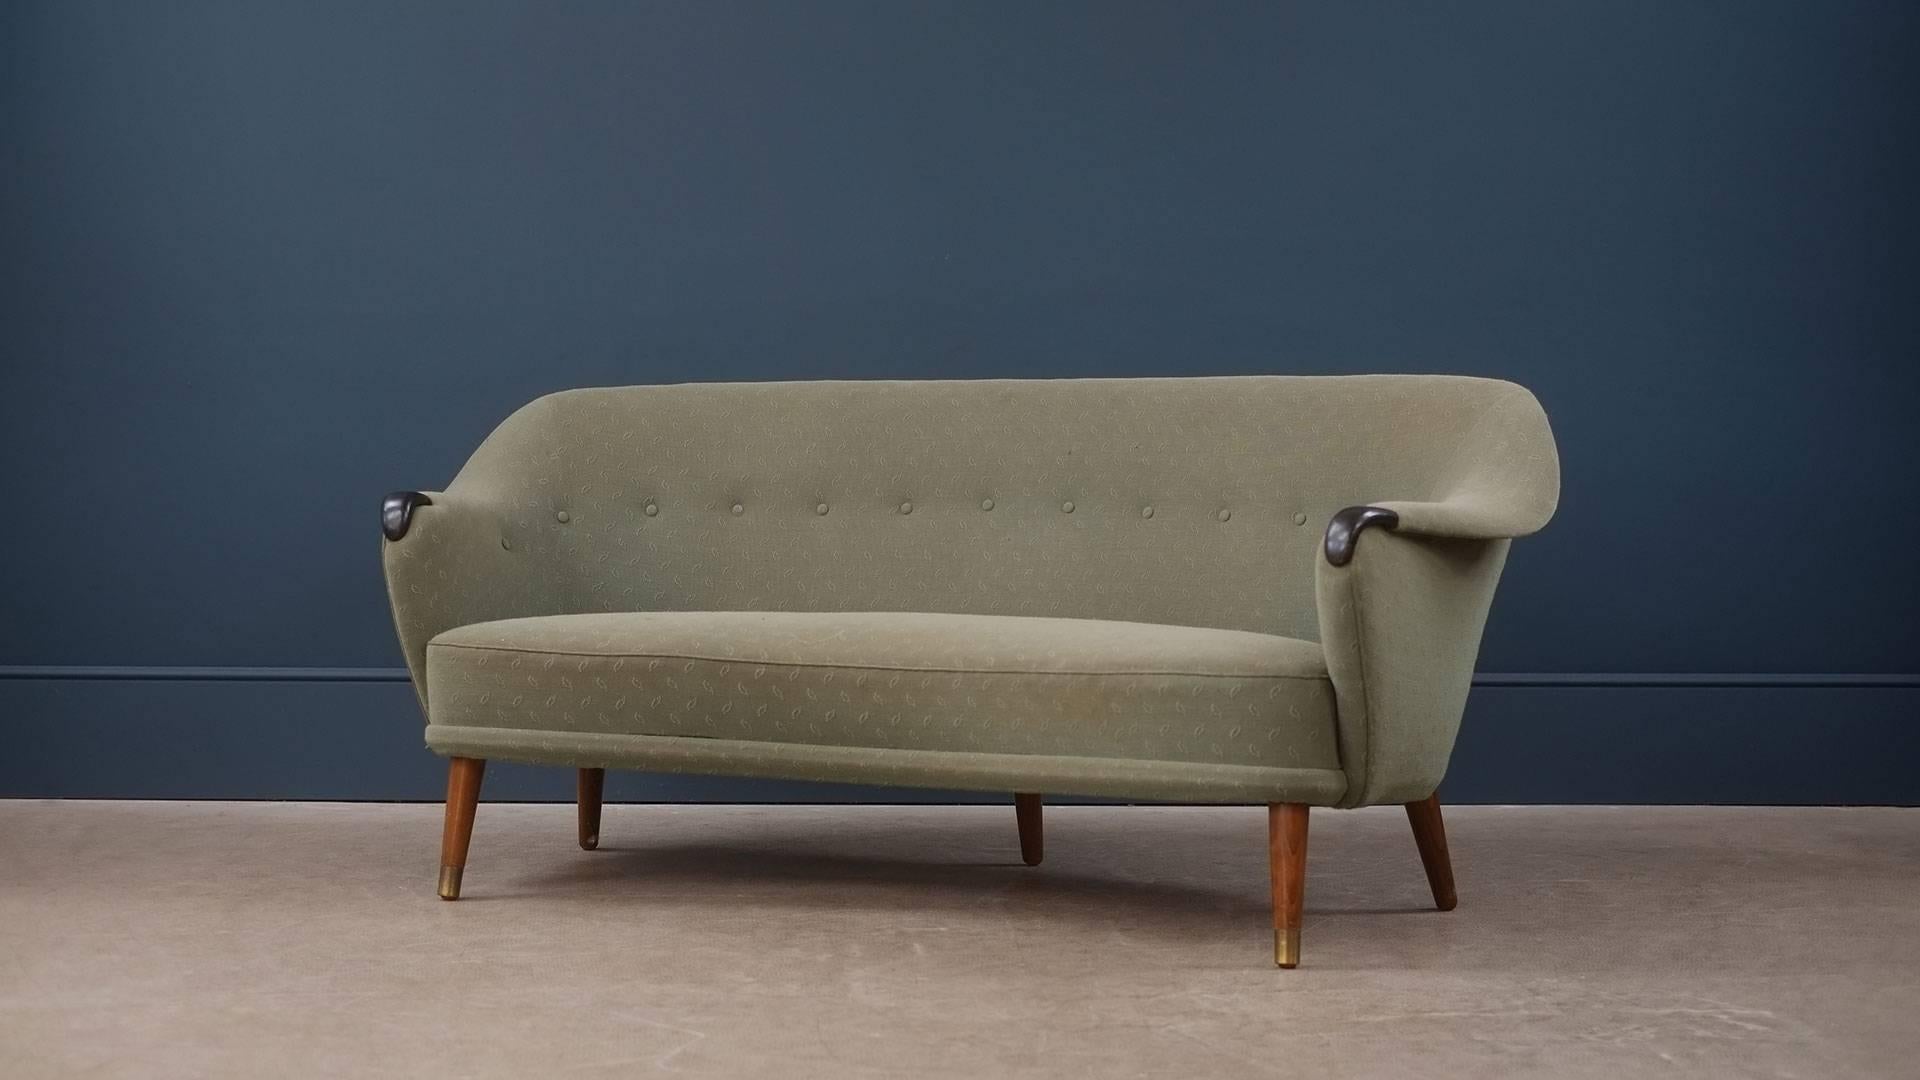 Staggering and ultra rare sofa designed by architect Arne Hovmand Olsen for cabinet maker Pedersen and Knap, Denmark, 1954. Amazing super sculptural sofa with fantastic detailing including original leather tips to the arms and brass sabots to the